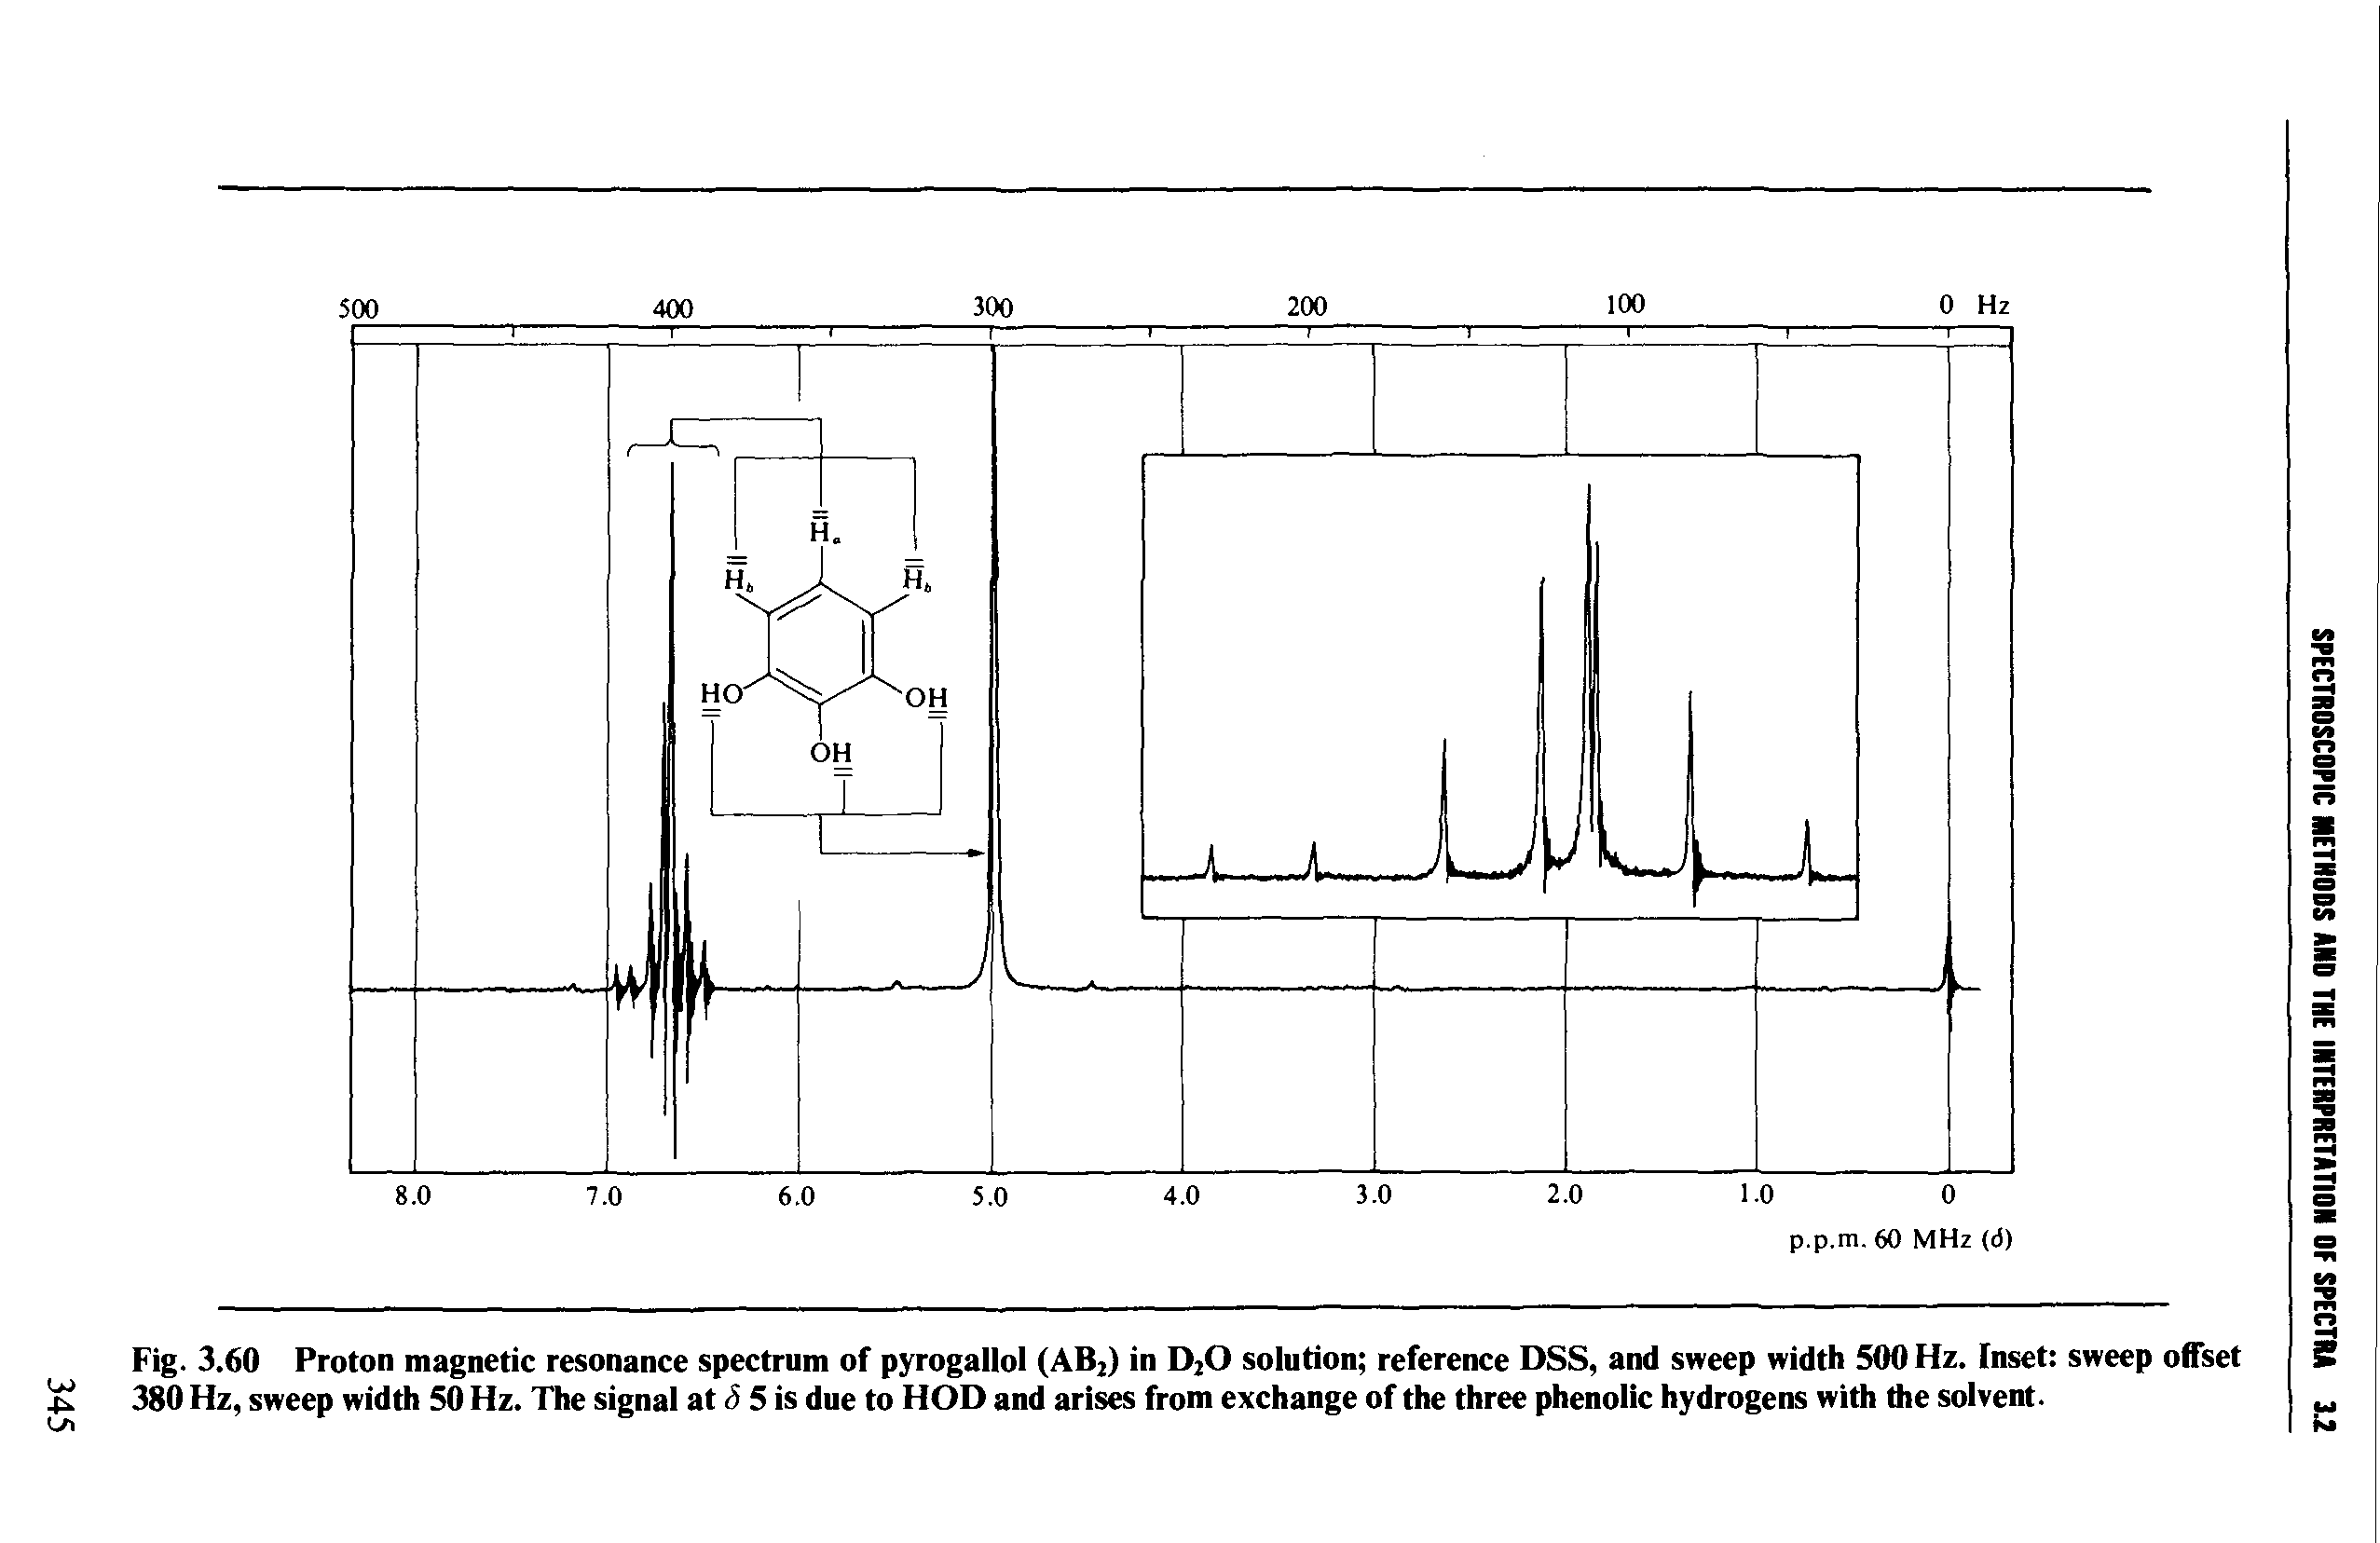 Fig. 3.60 Proton magnetic resonance spectrum of pyrogallol (AB2) in DjO solution reference DSS, and sweep width 500 Hz. Inset sweep ofTset 380 Hz, sweep width 50 Hz. The signal at <5 5 is due to HOD and arises from exchange of the three phenolic hydrogens with the solvent.